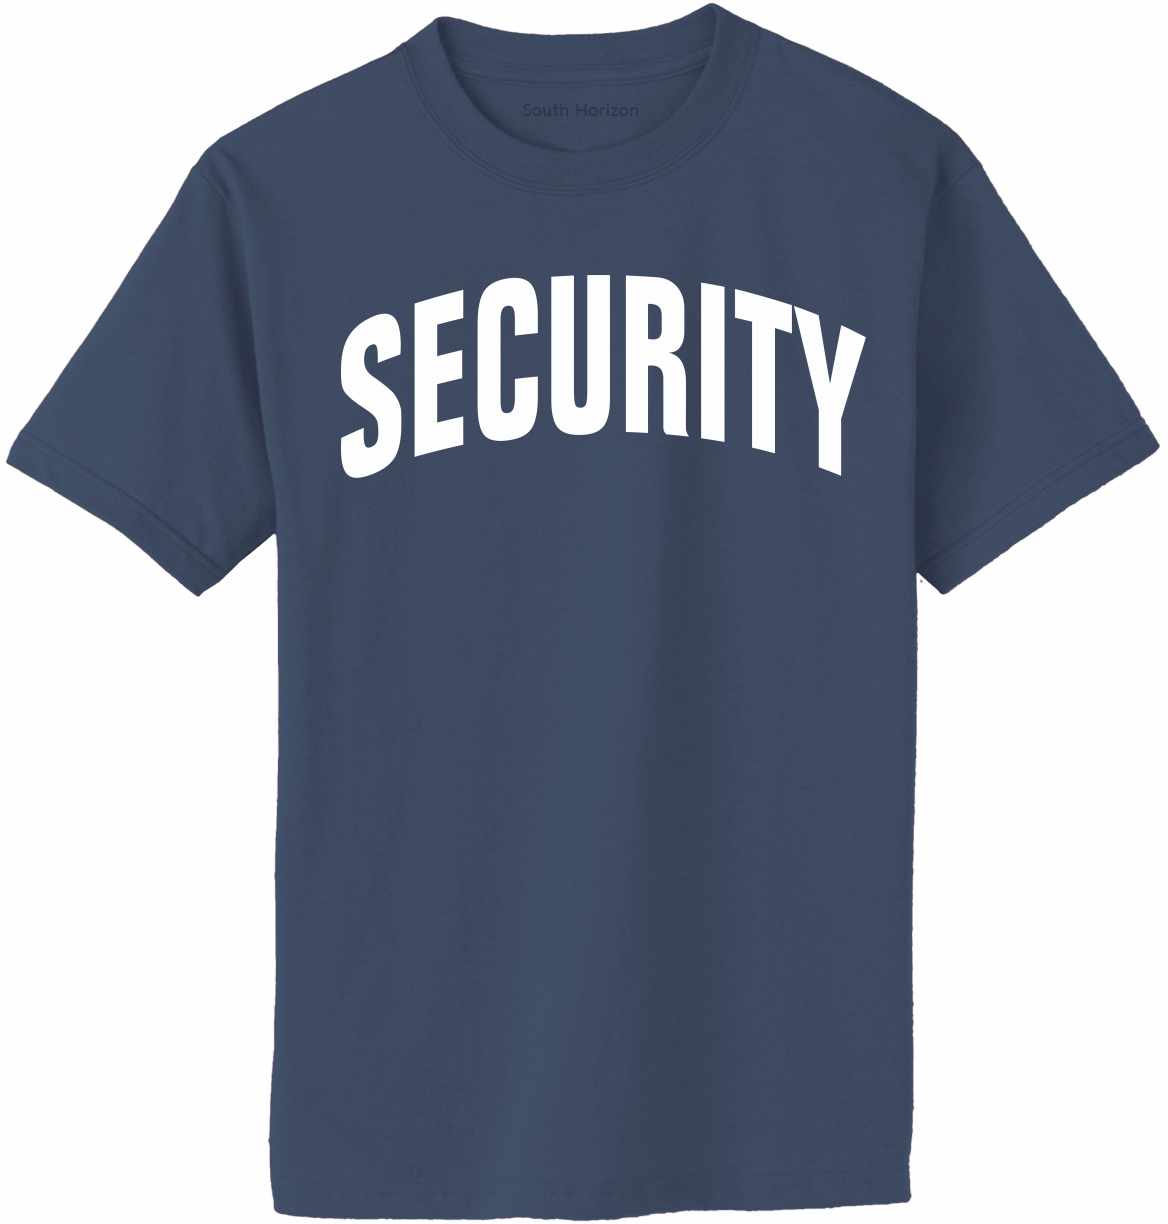 SECURITY on Adult T-Shirt